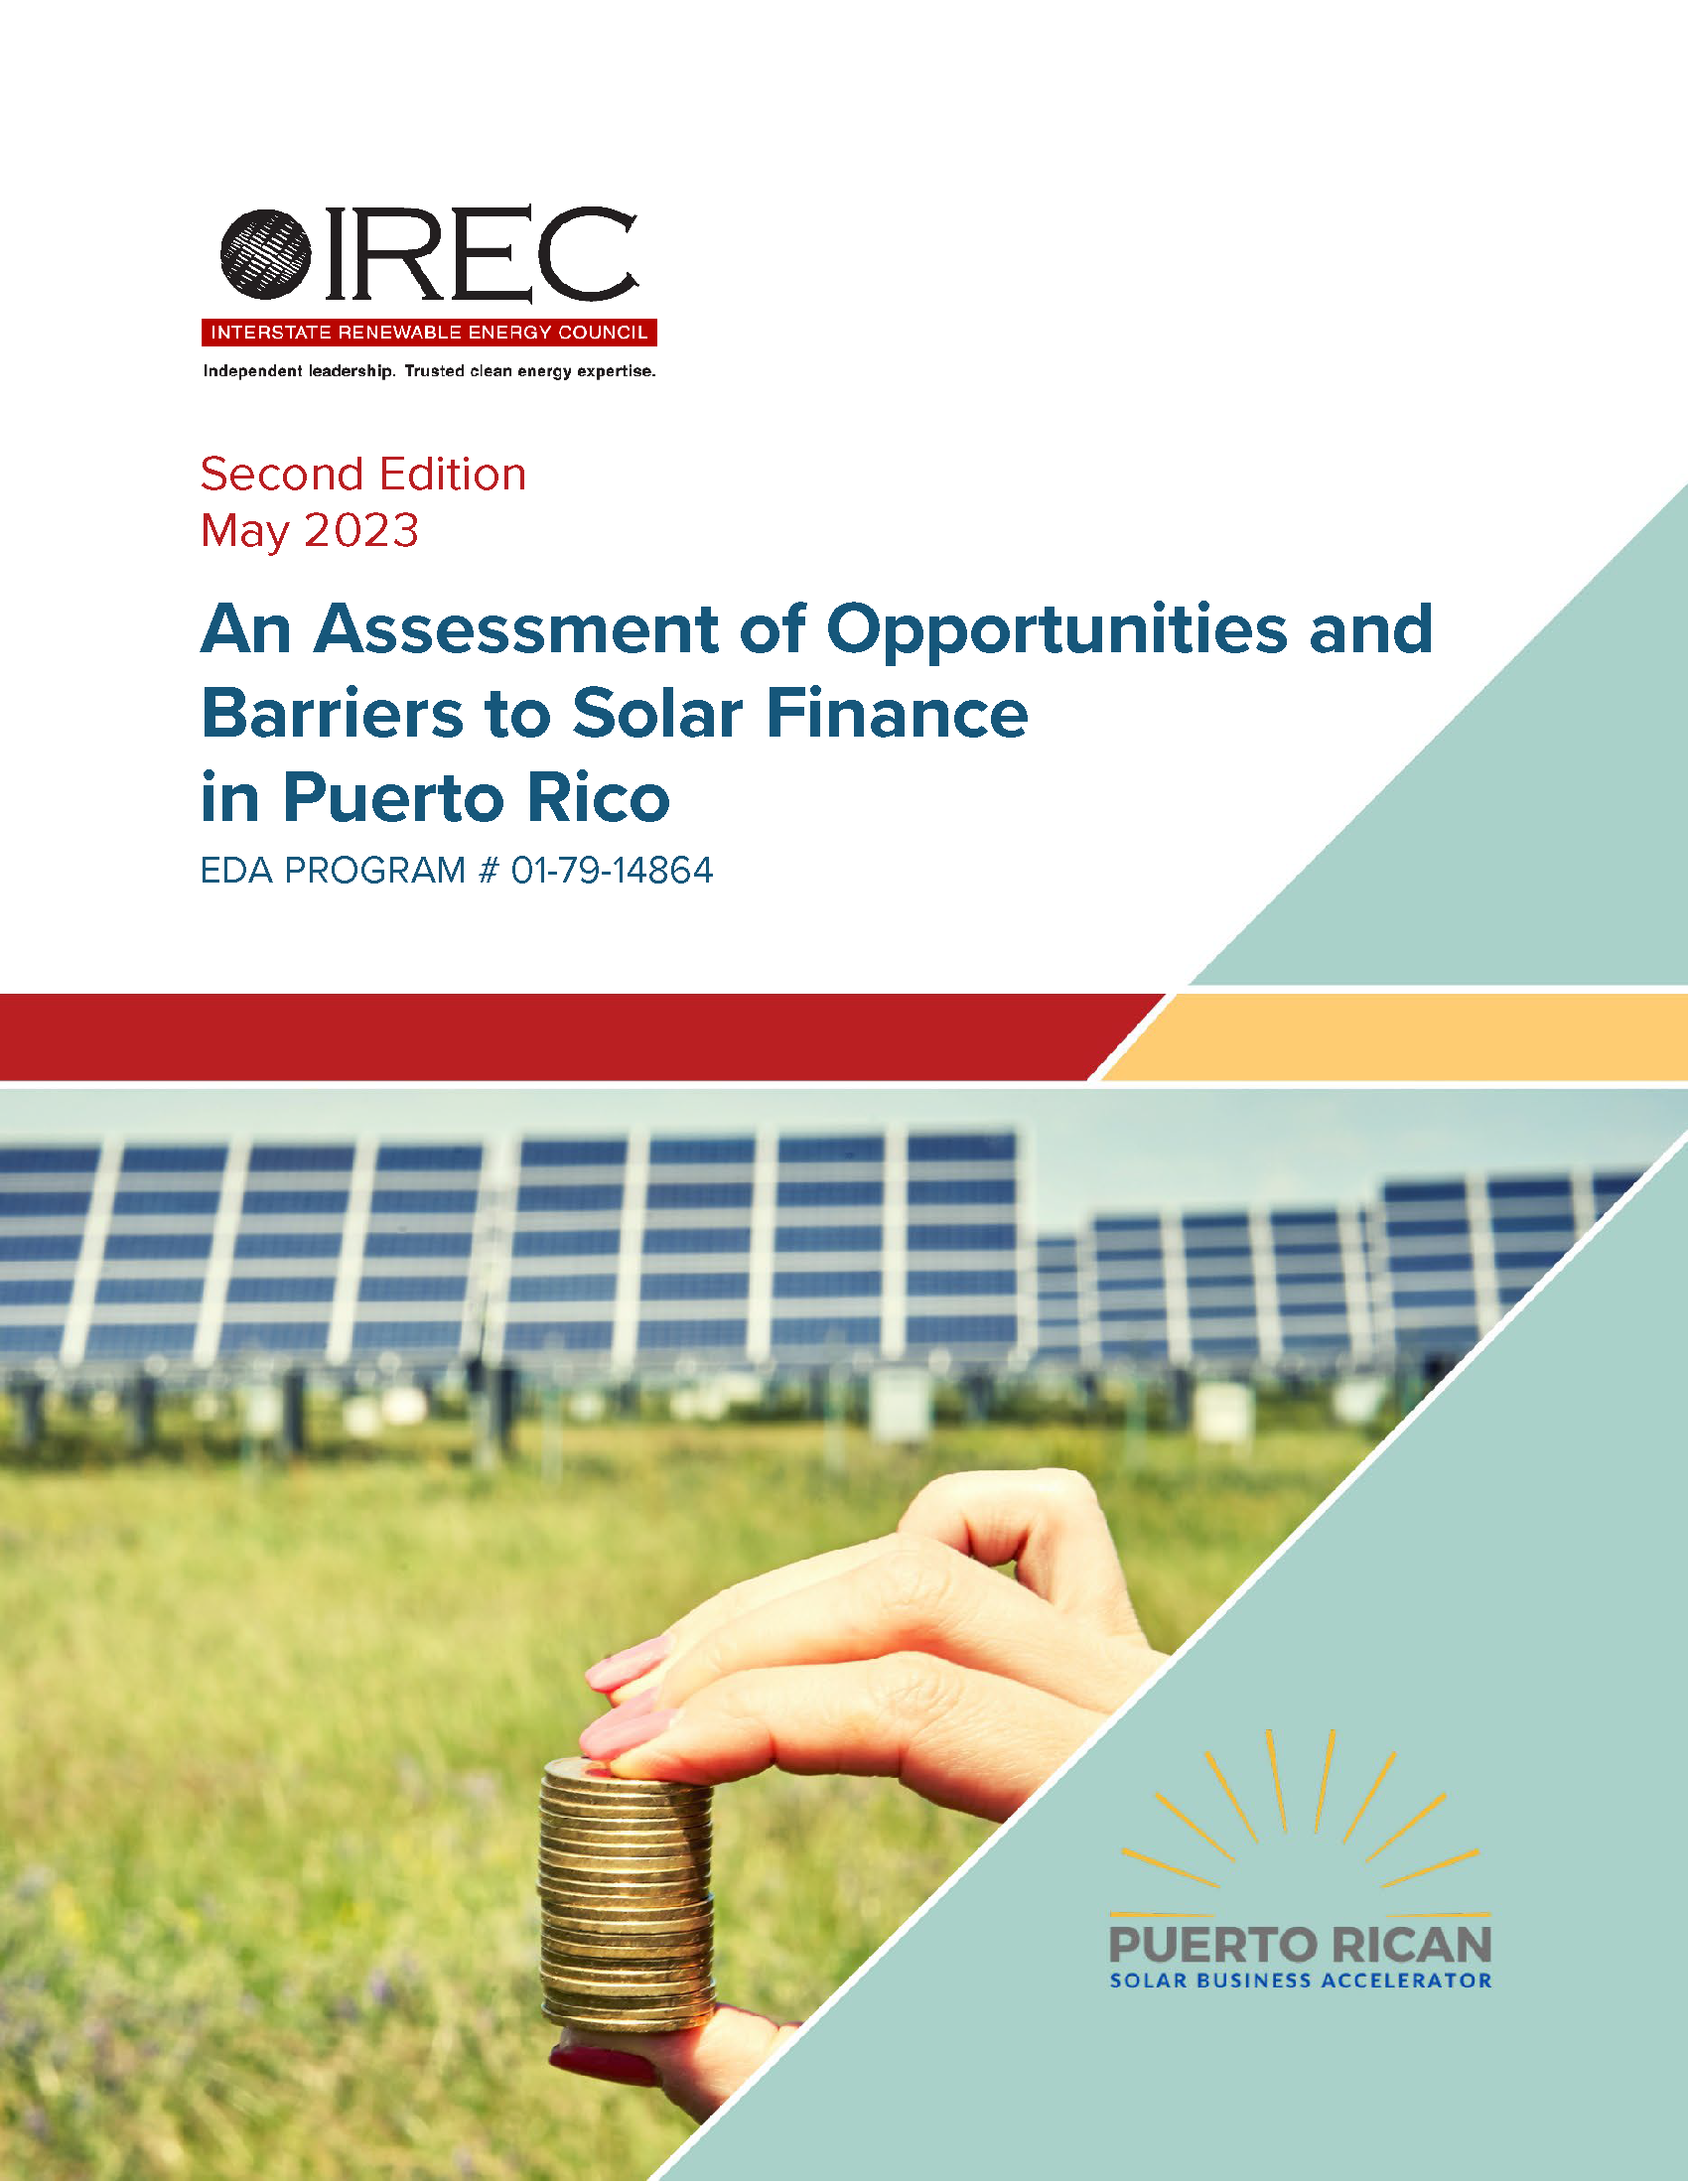 An Assessment of Opportunities and Barriers to Solar Finance in Puerto Rico: Second Edition